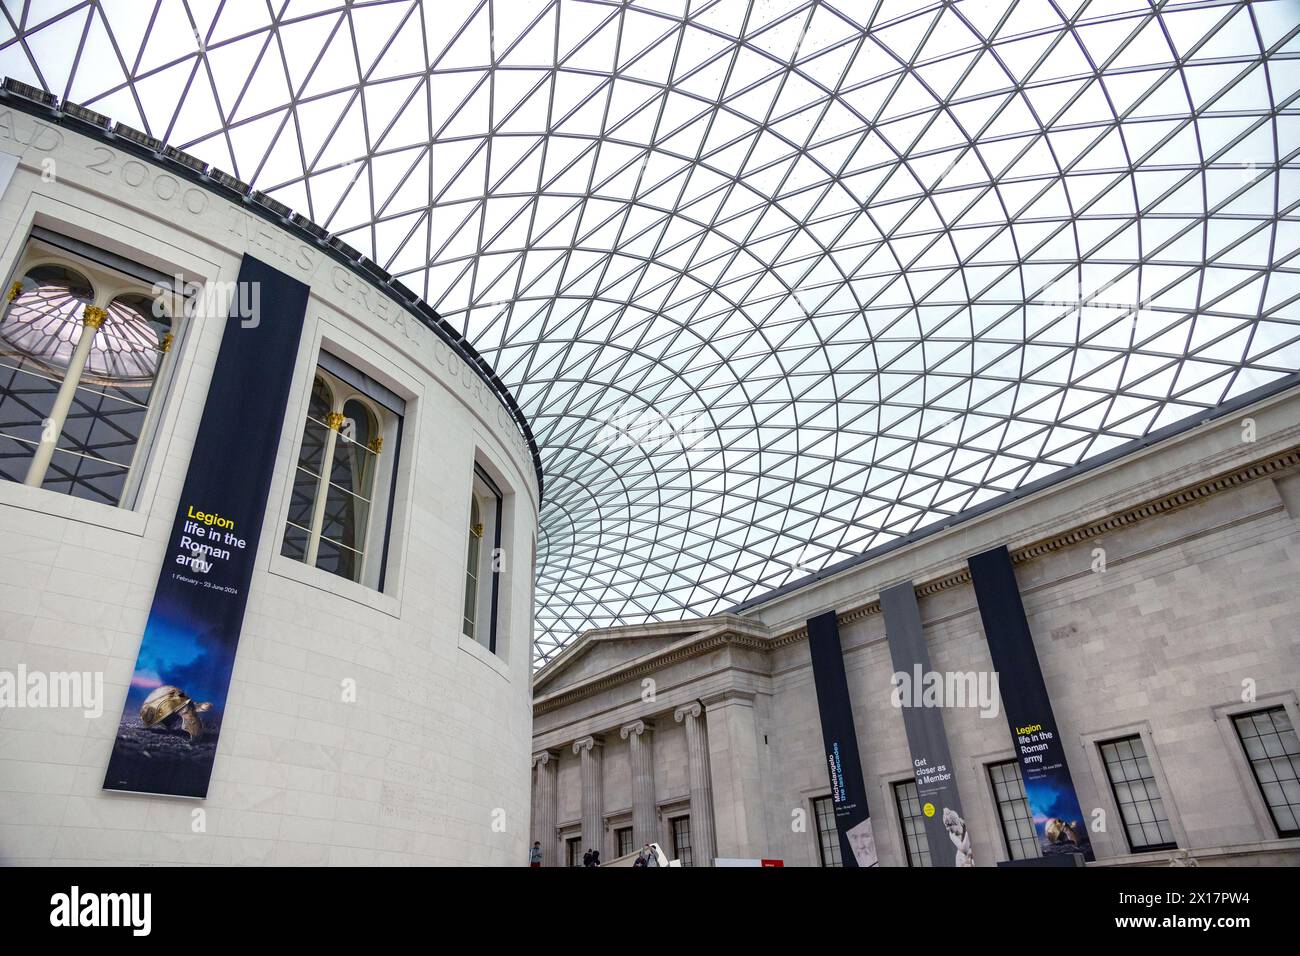 he iconic Great Court at the British Museum in London, featuring the famous tessellated glass roof. Stock Photo